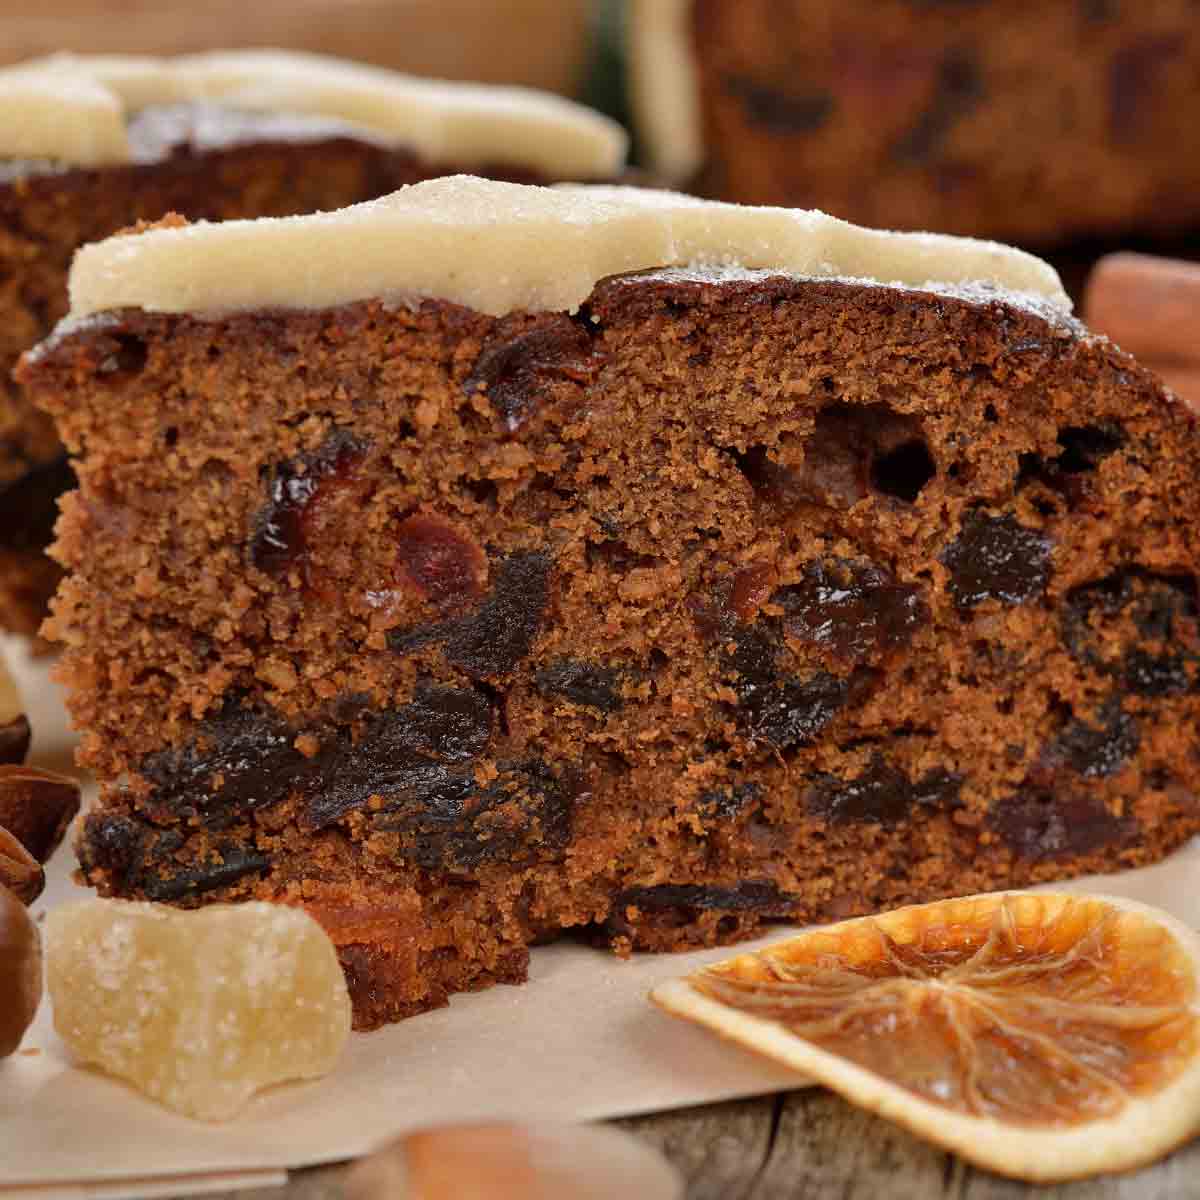 A Slice Of Christmas Cake With Icing On Top